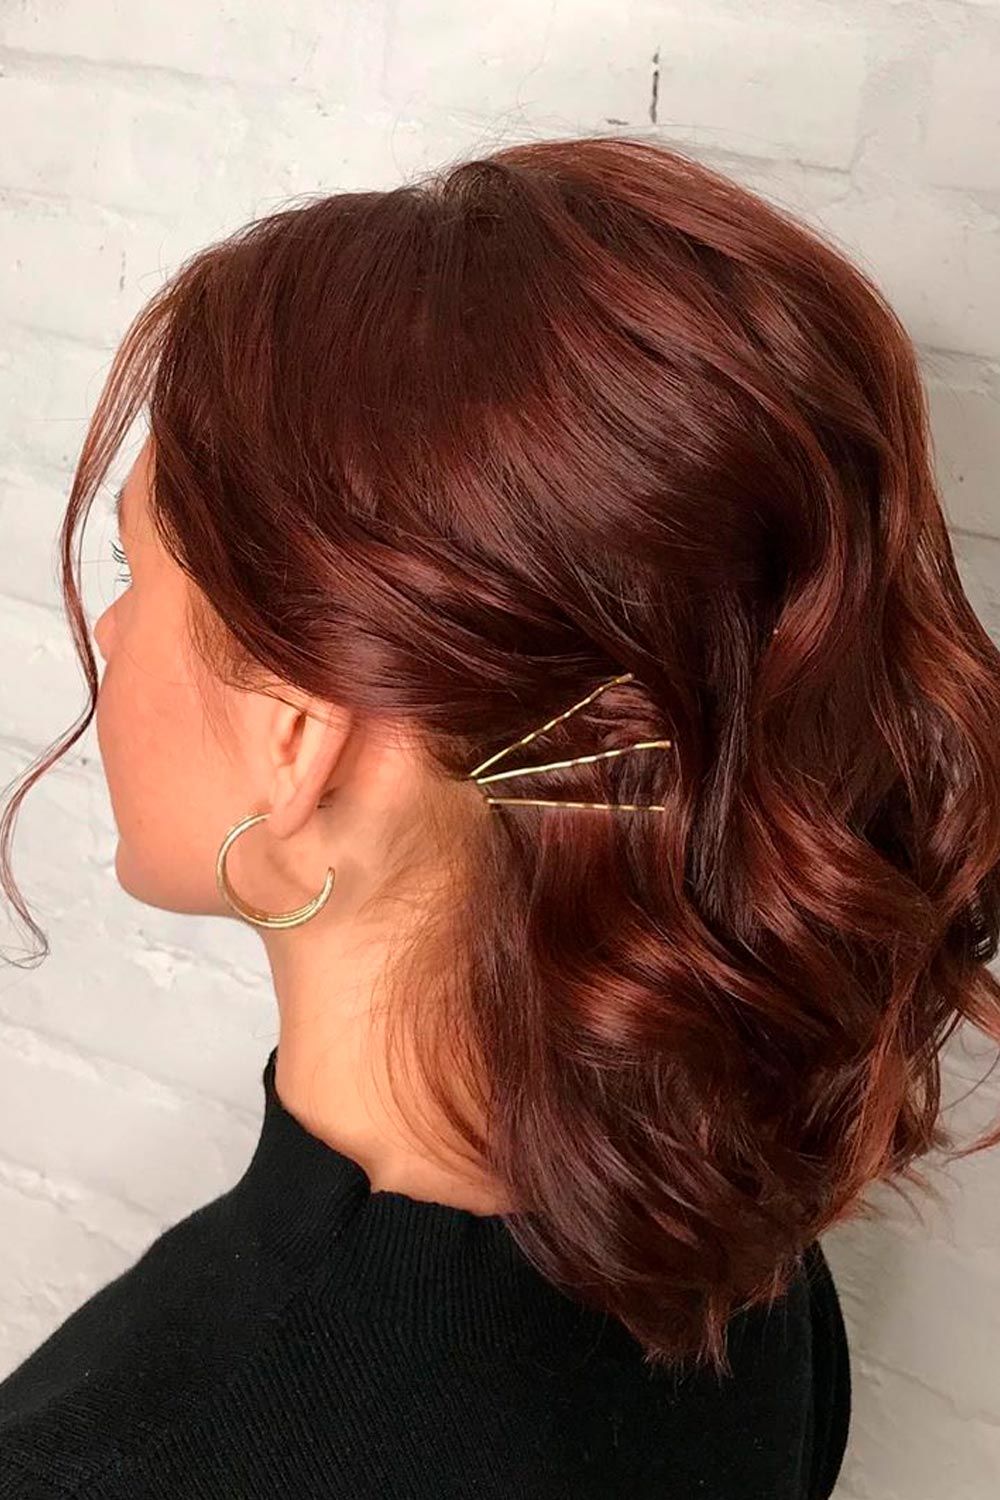 Short Hairstyles for a Christmas Party | LoveHairStyles.com